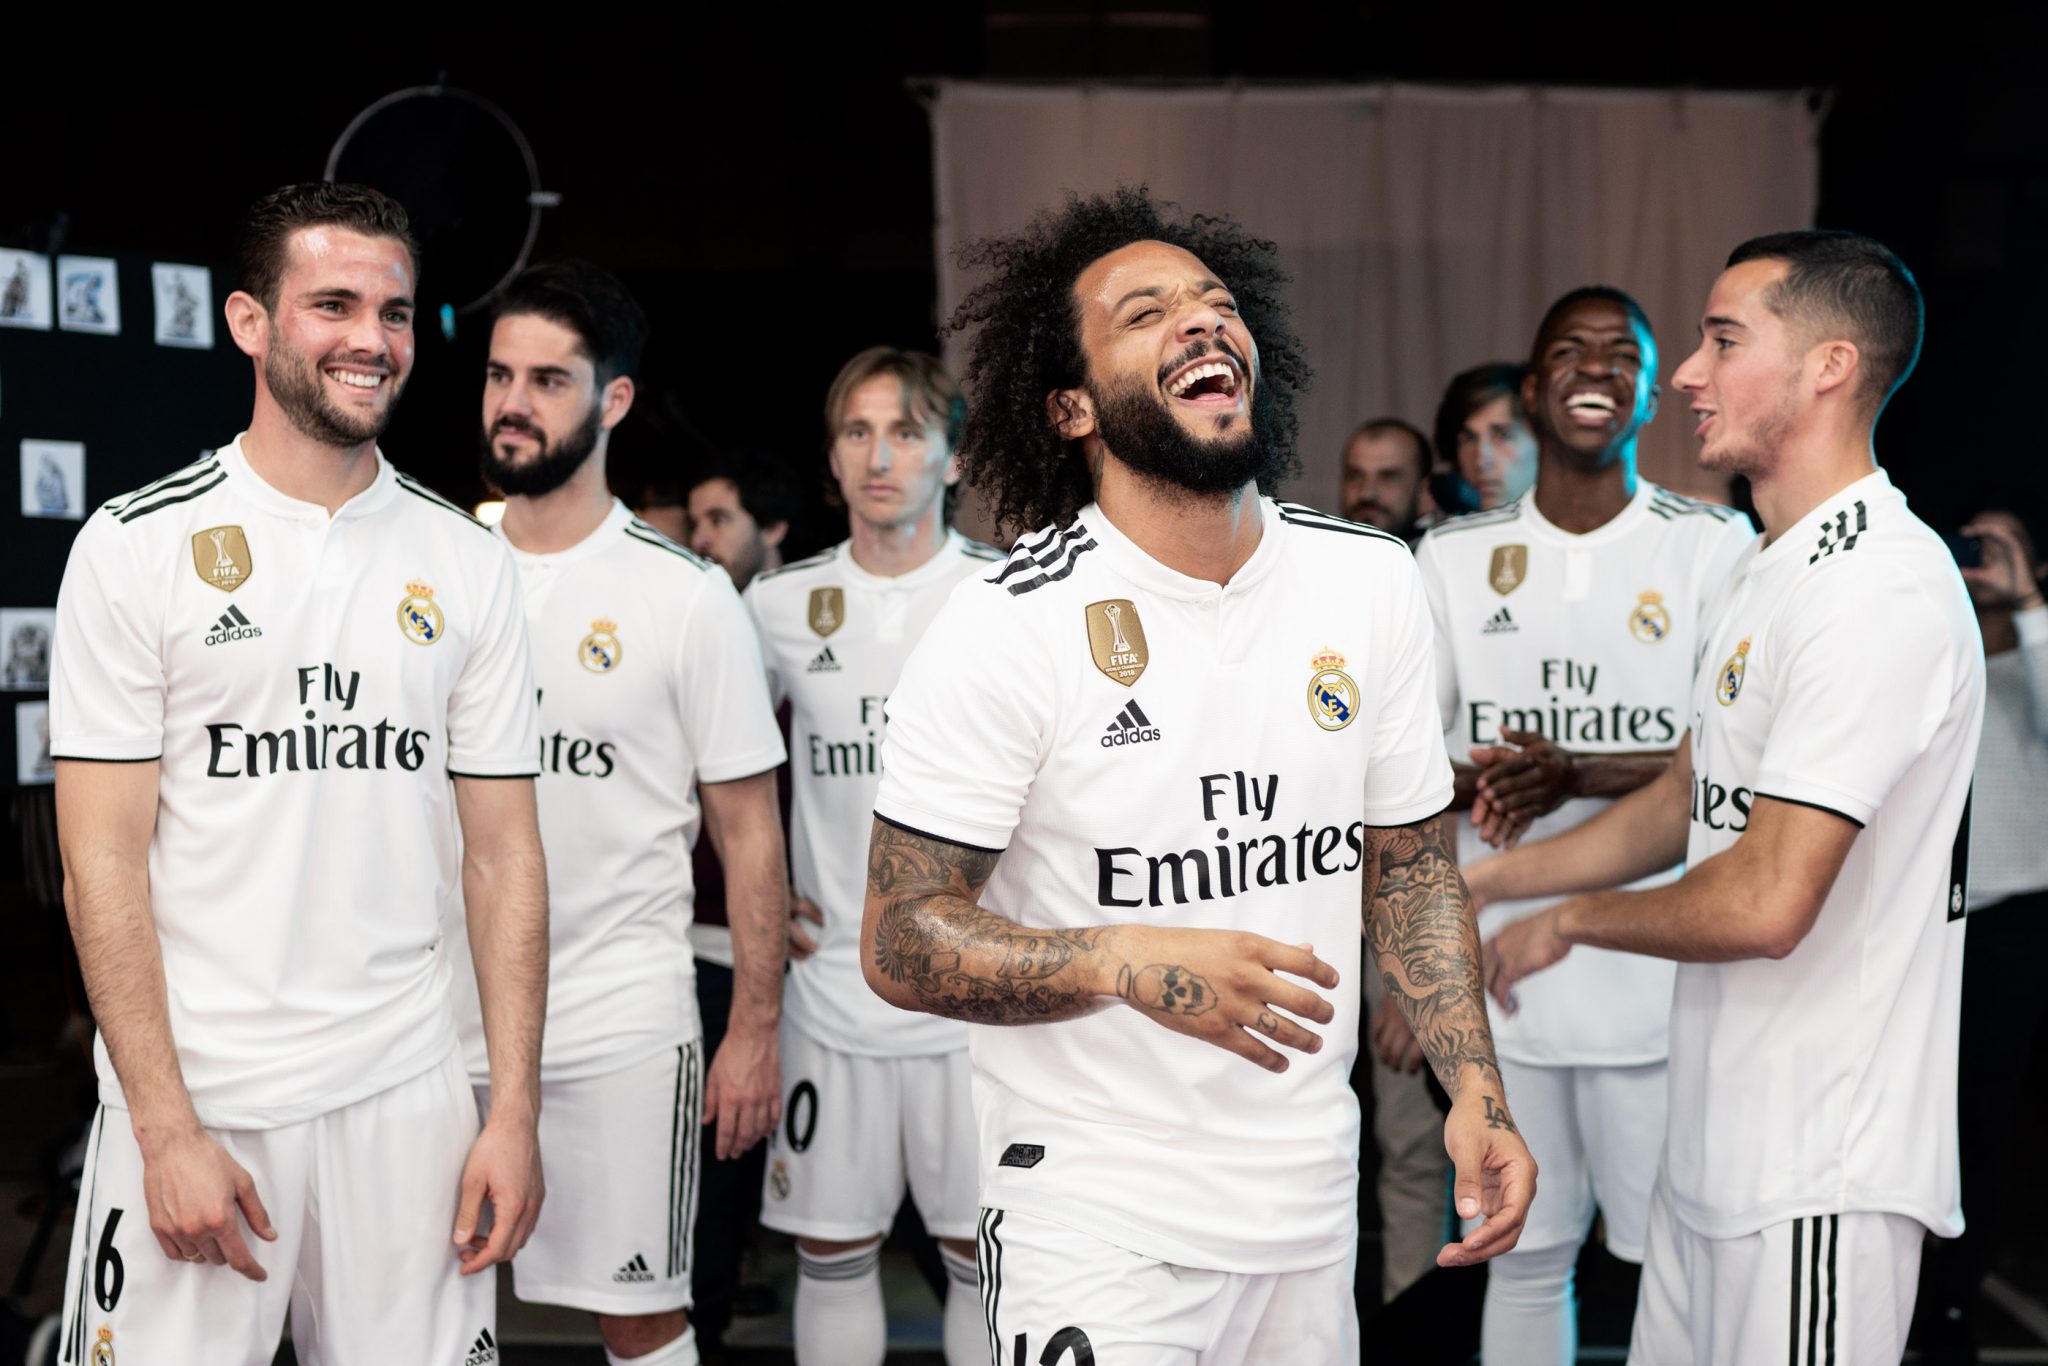 David LaChapelle | Audi x Real Madrid | Behind-the-scenes photographs from the Audi E-tron launch shoot in Madrid. | 9